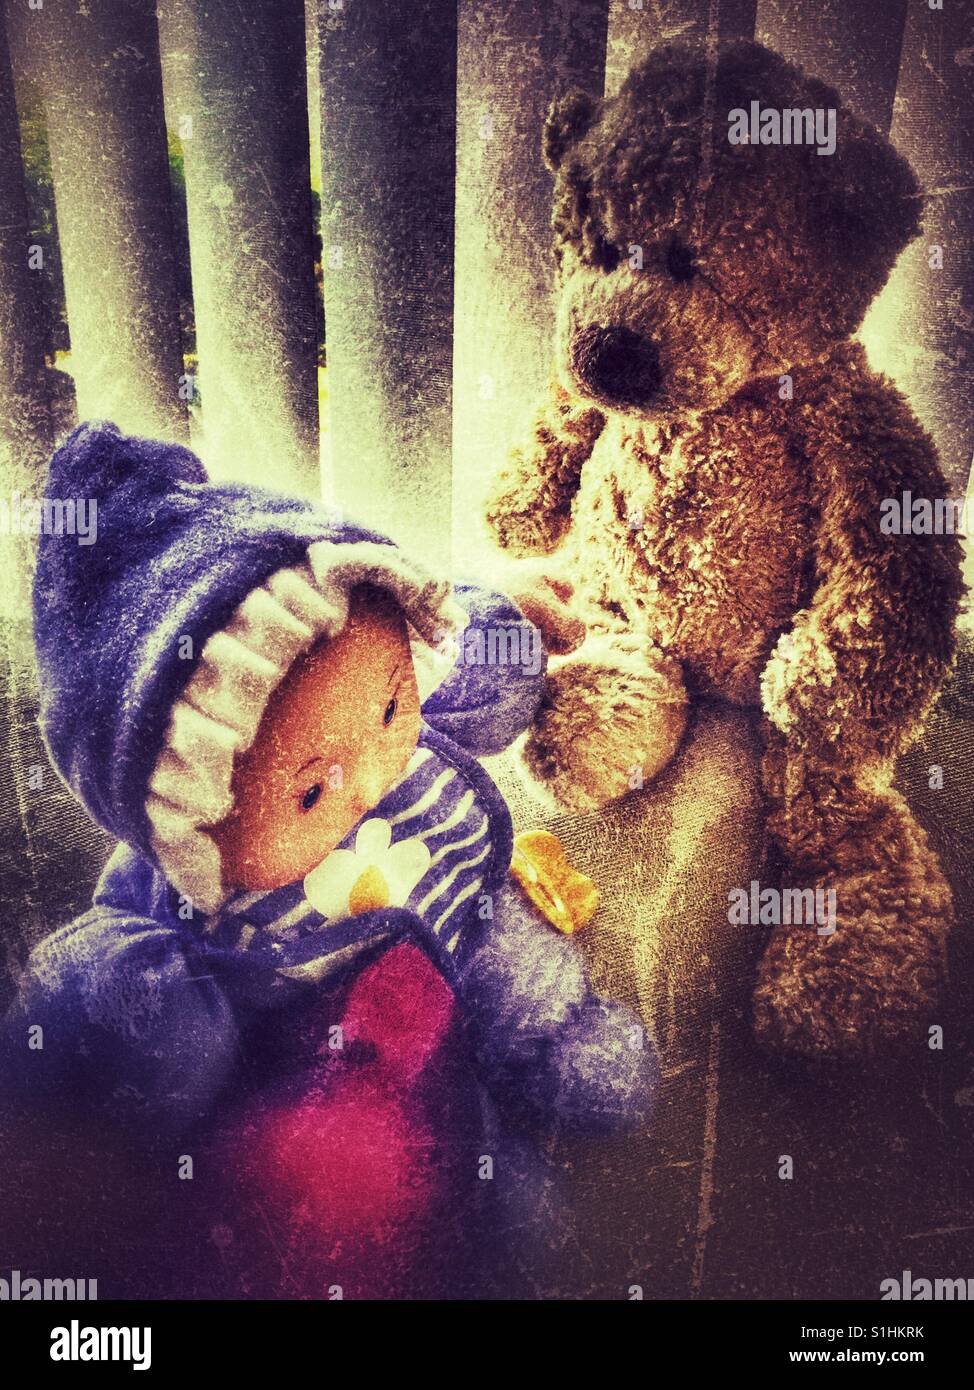 Friends, a baby doll and stuffed teddy bear. Stock Photo